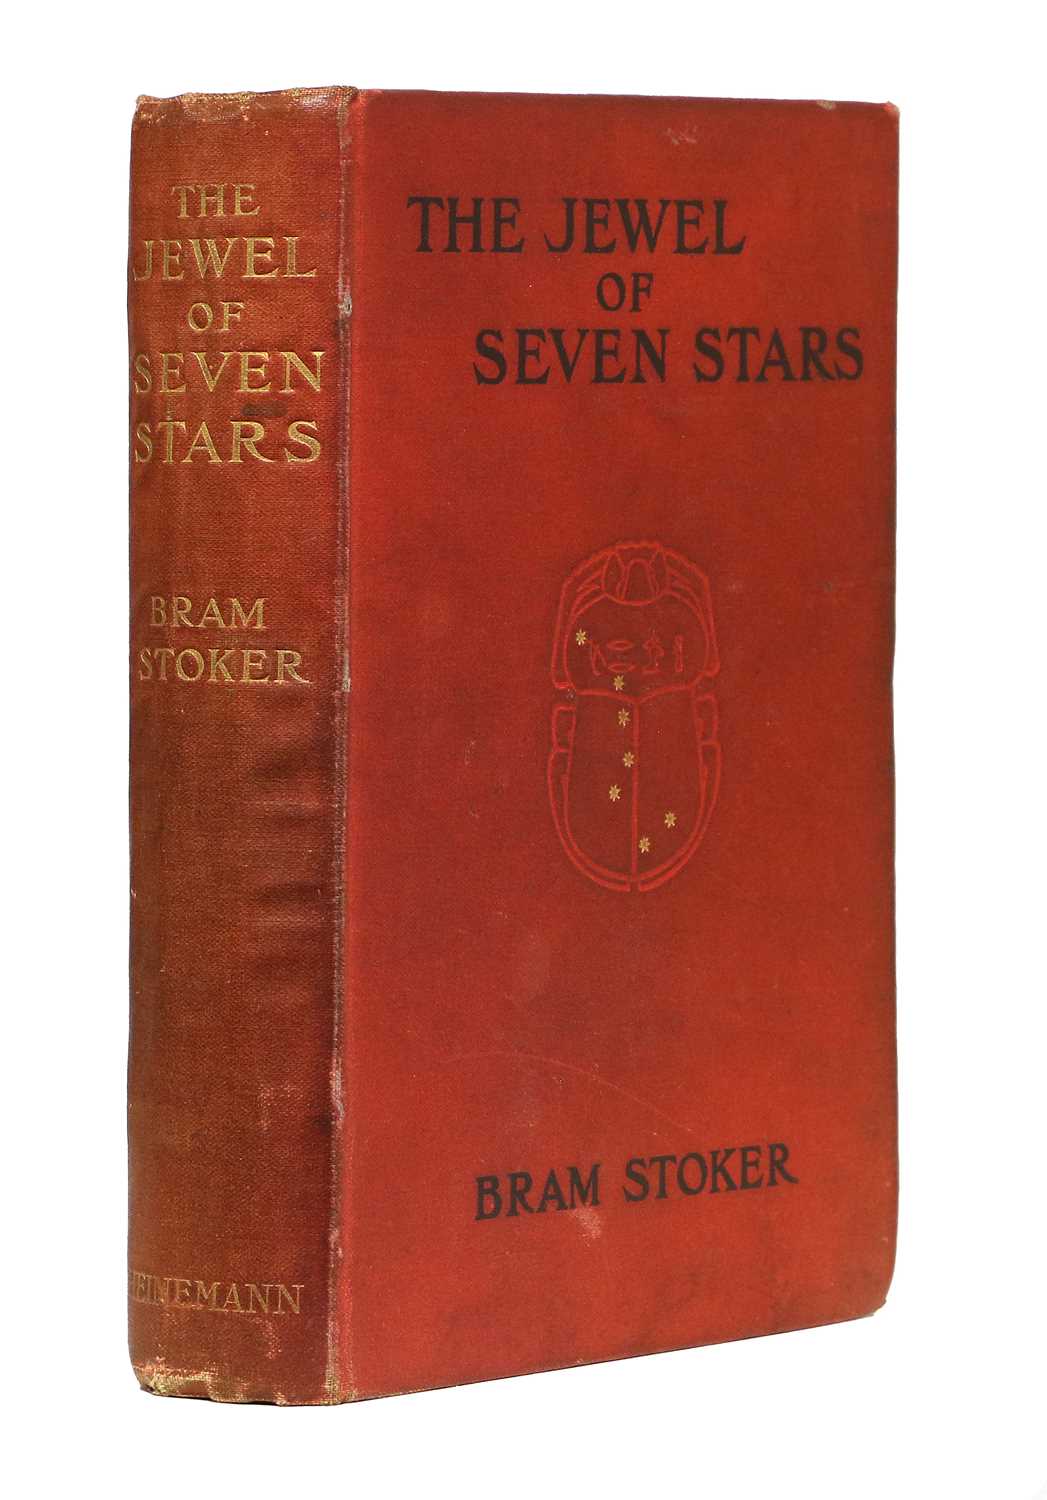 Stoker (Bram). The Jewel of Seven Stars. William Heinemann, 1903, first edition, tanning to pages,